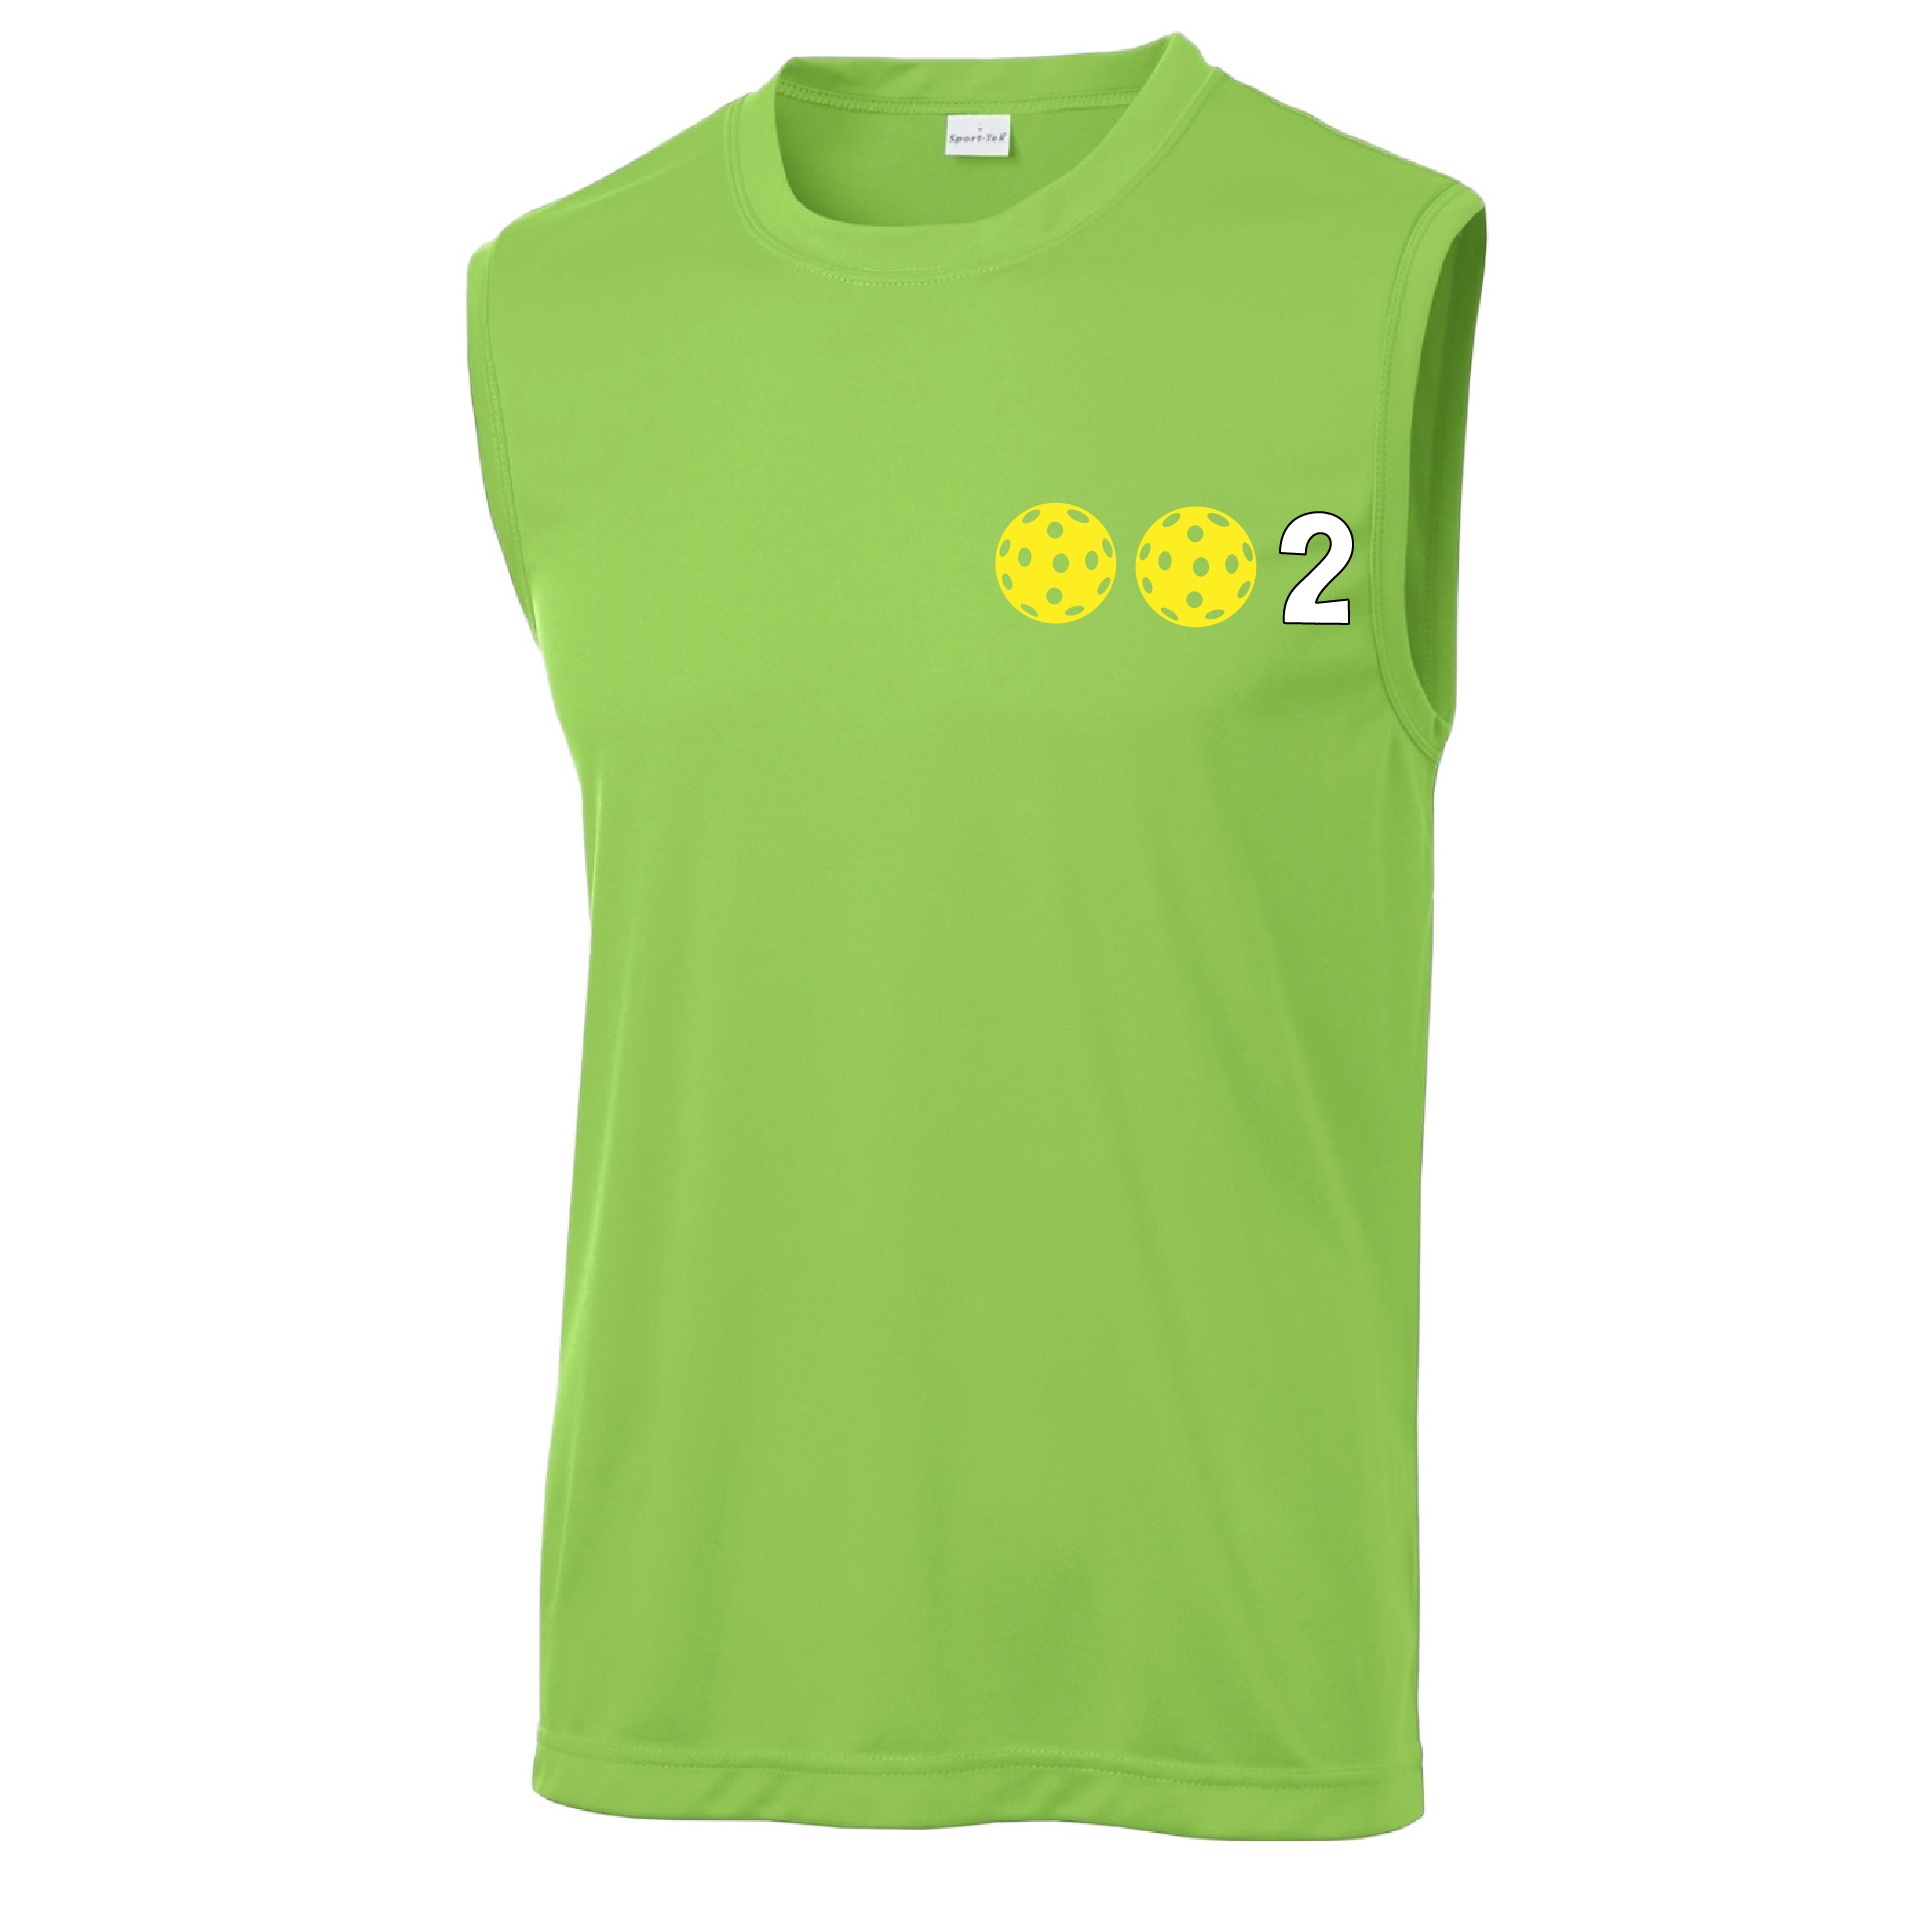 Design: 002 Pickleballs customizable color (Yellow, White, Cyan, Green, Orange)  Men's Styles: Sleeveless   Shirts are lightweight, roomy and highly breathable. These moisture-wicking shirts are designed for athletic performance. They feature PosiCharge technology to lock in color and prevent logos from fading. Removable tag and set-in sleeves for comfort.